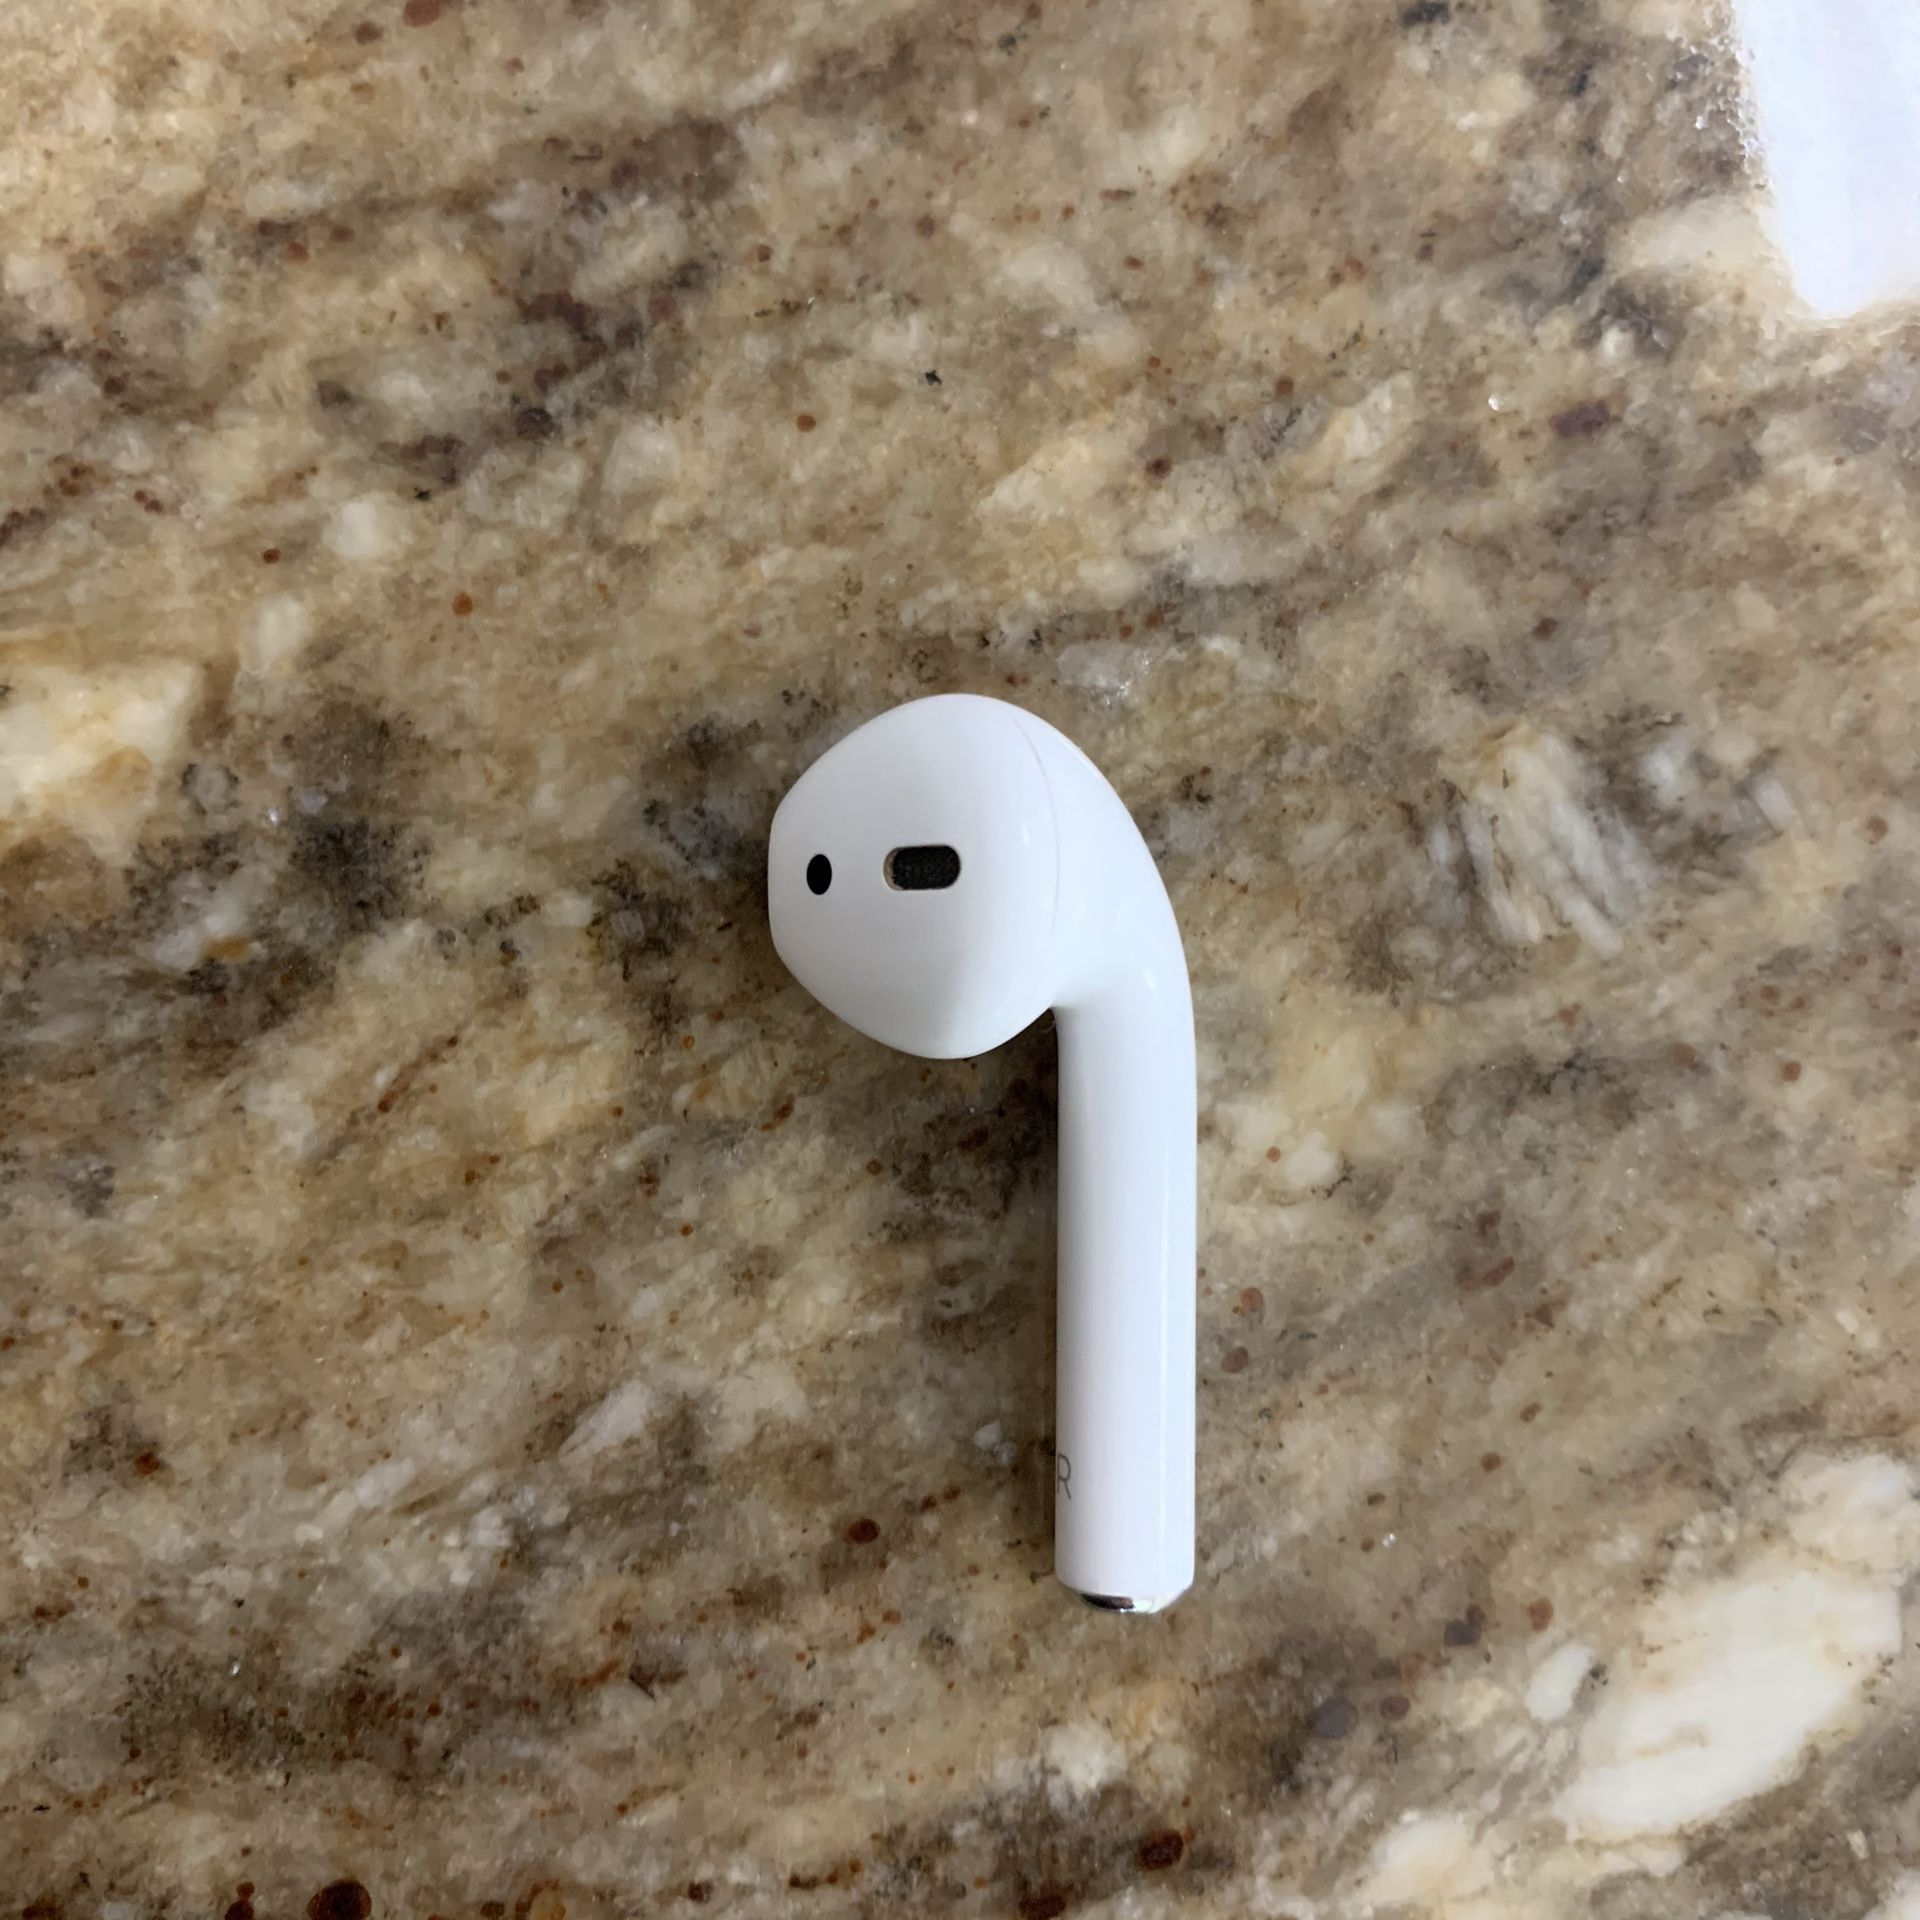 Right Apple Airpod - 1st Gen - Works Perfect 👌